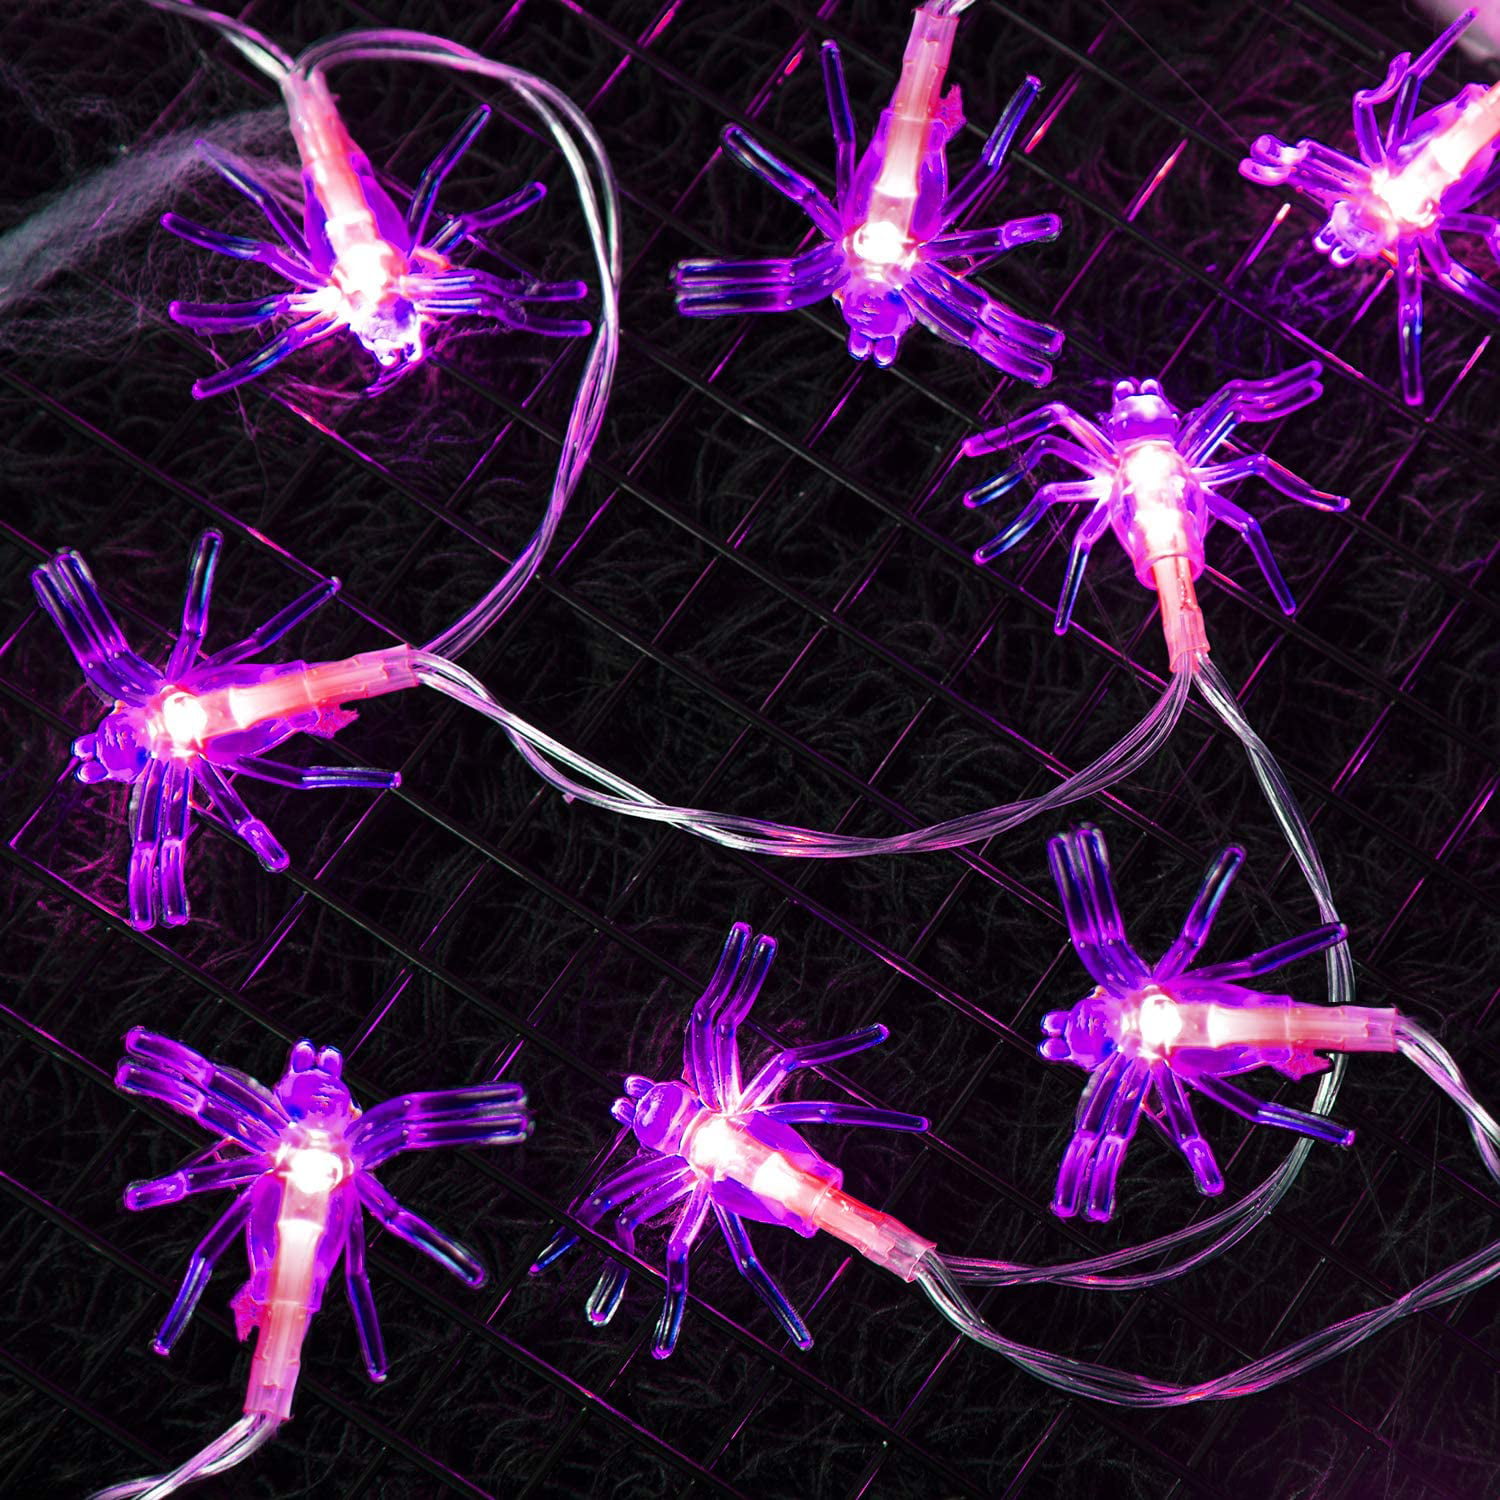 show original title Details about   Halloween LED Fairy Lights 20 Spiders/Decorative lighting for interior and exterior/PART 